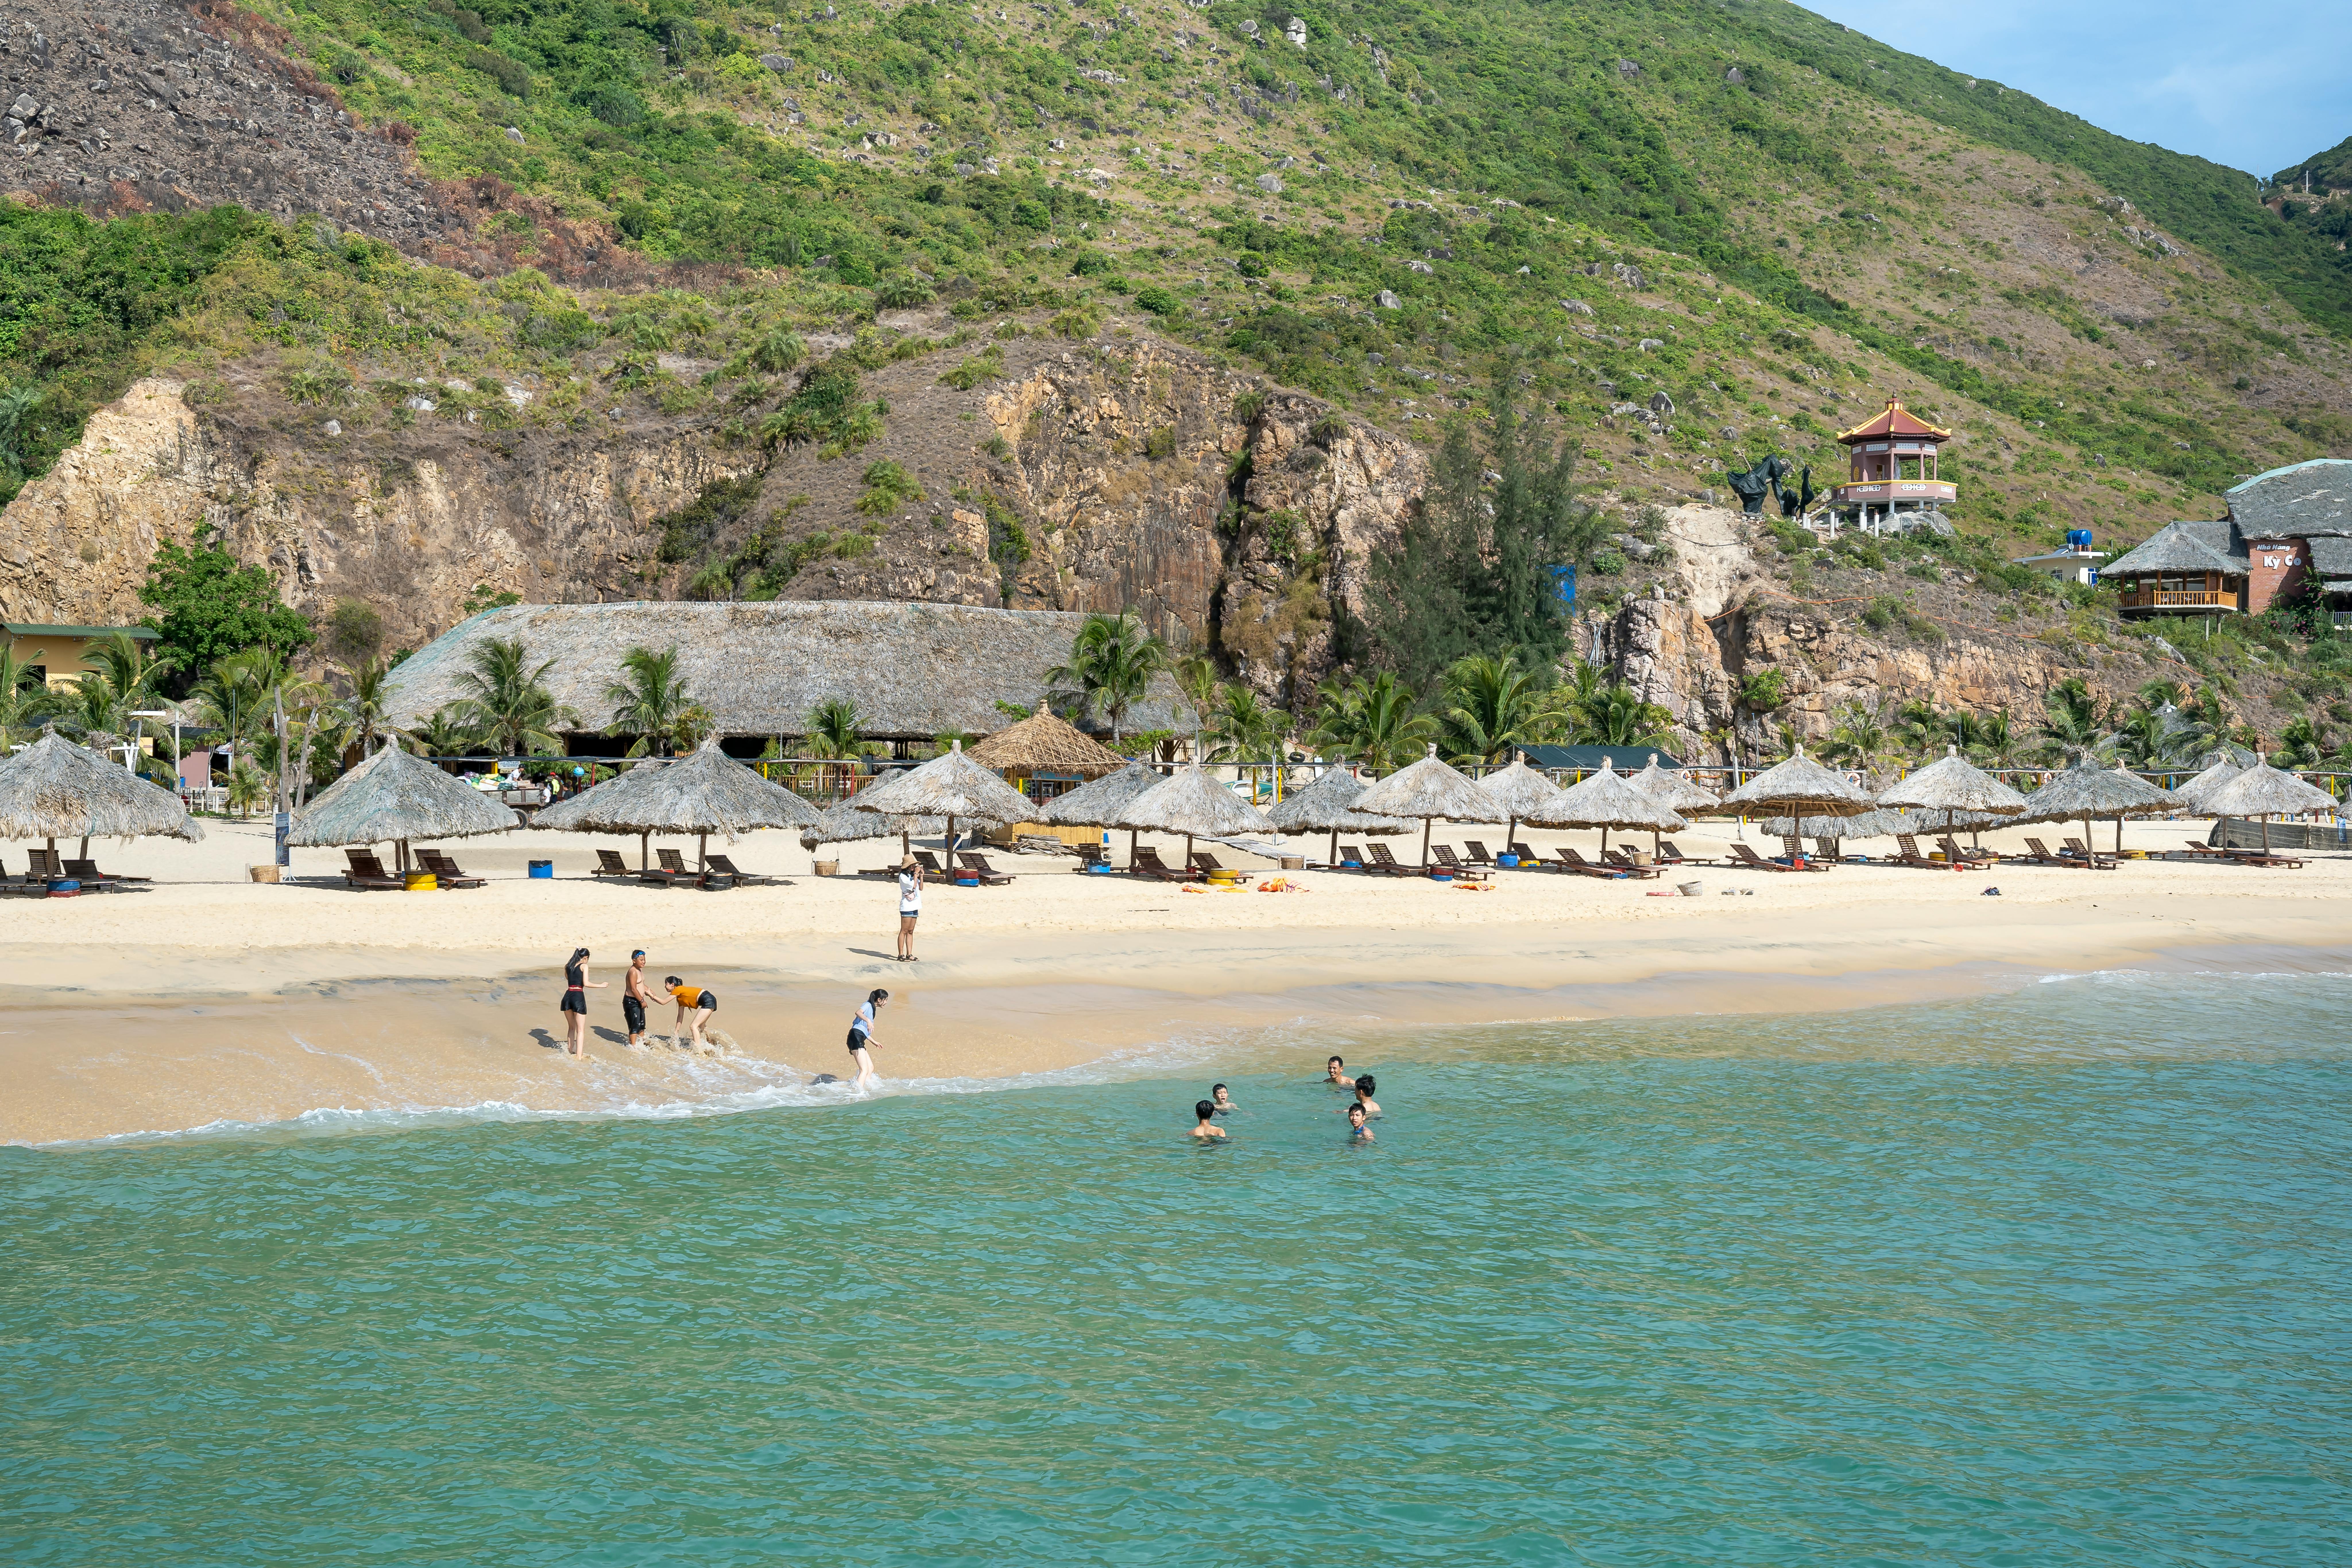 people chilling on sandy beach surrounded by grassy hills